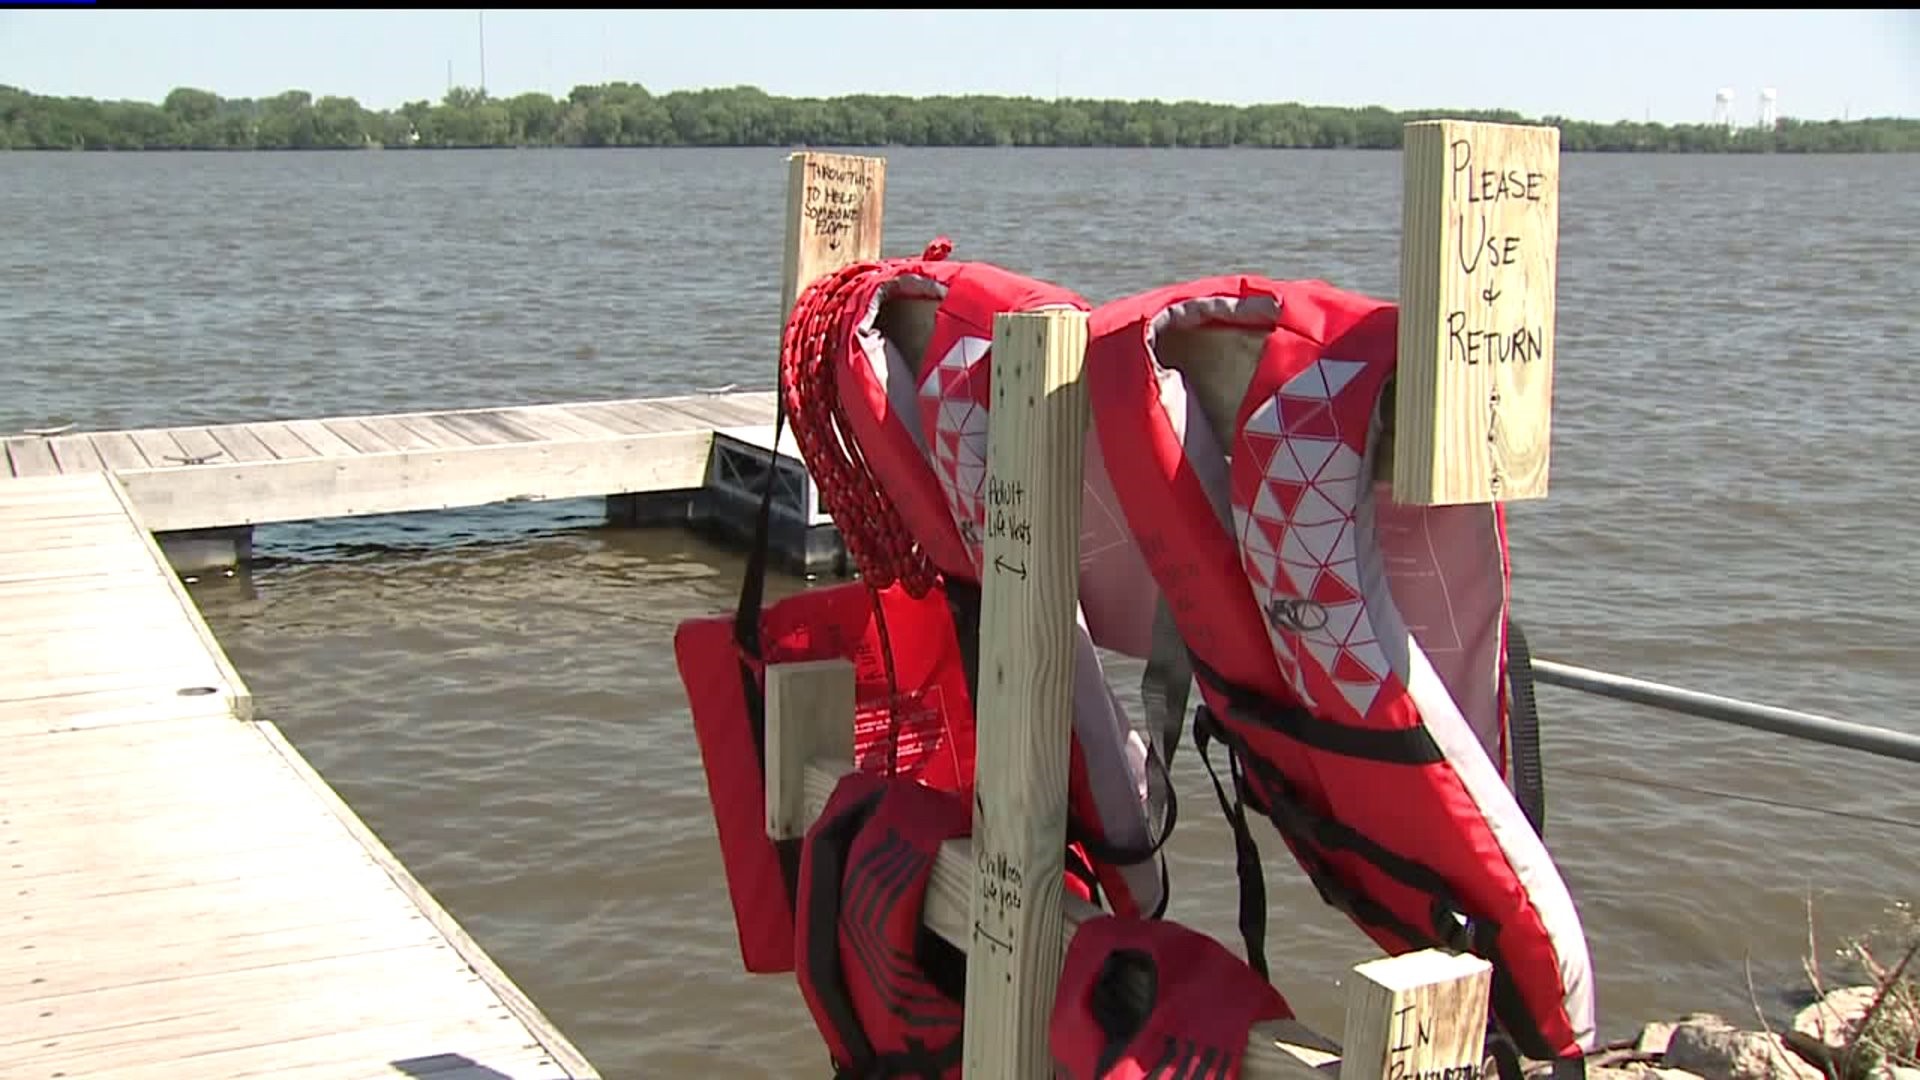 College student builds life vest station after hearing of Mississippi River drowning